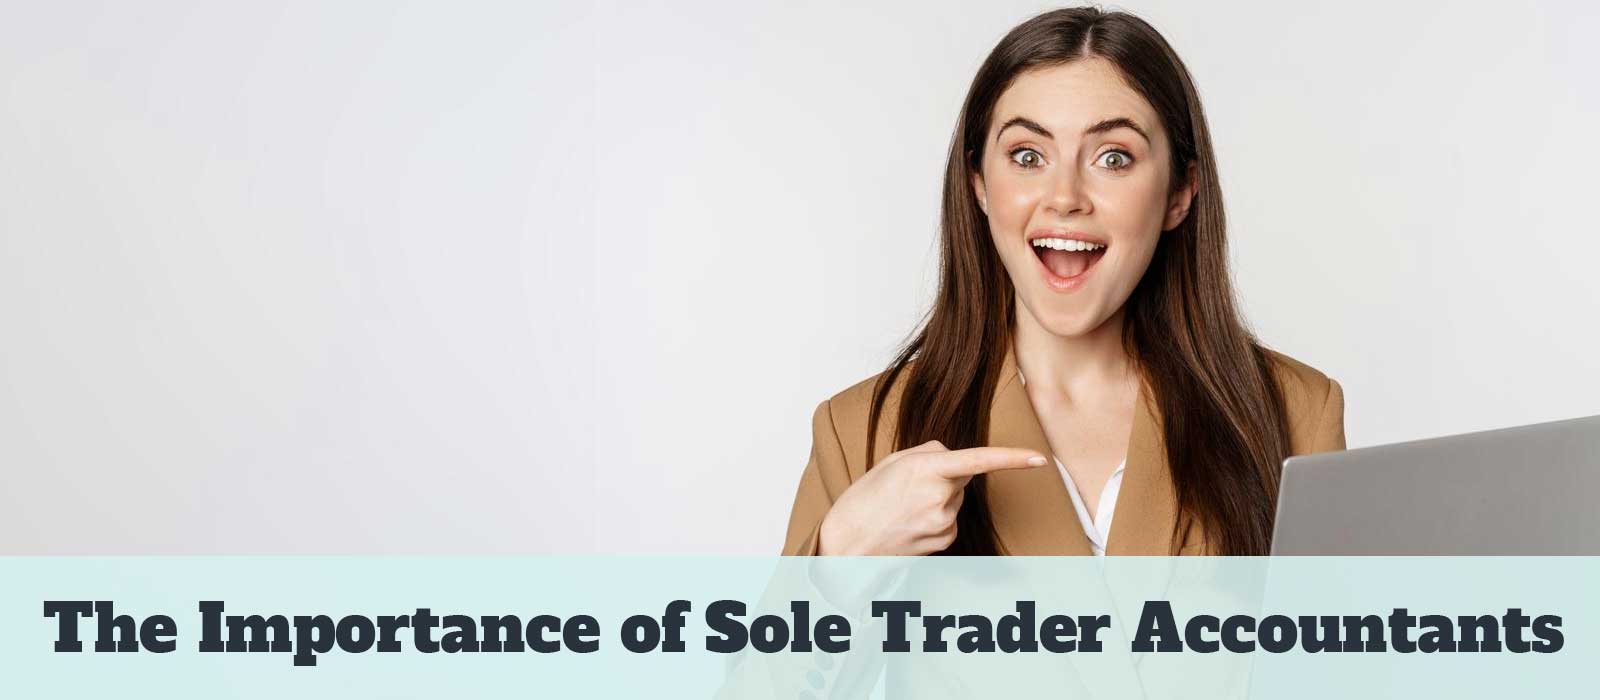 The Importance of Sole Trader Accountants